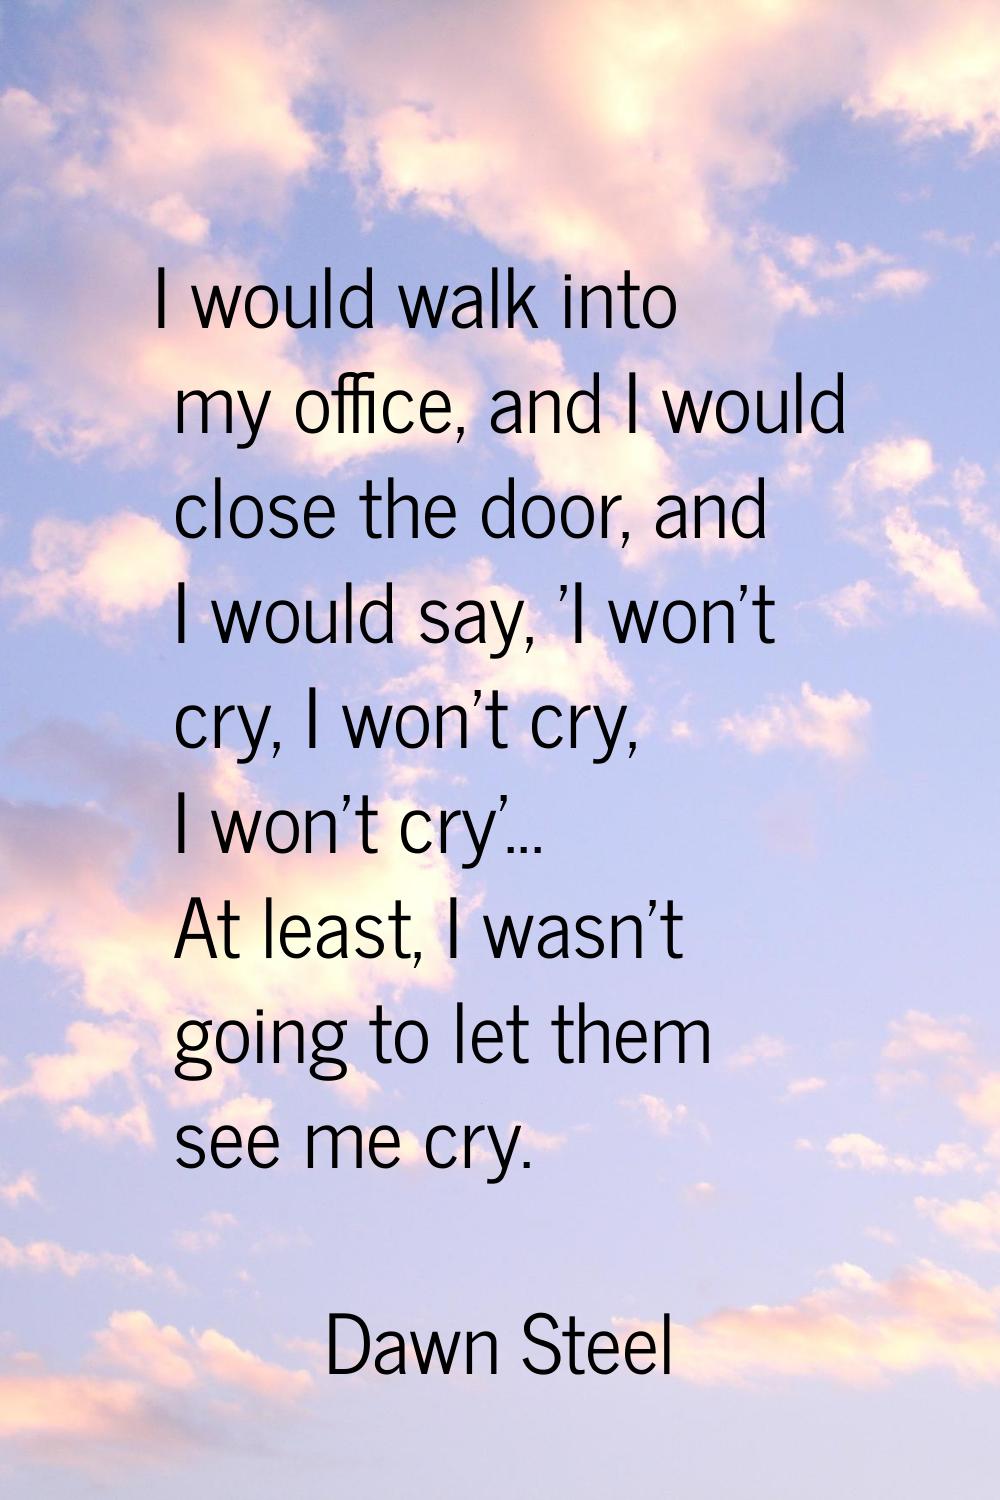 I would walk into my office, and I would close the door, and I would say, 'I won't cry, I won't cry